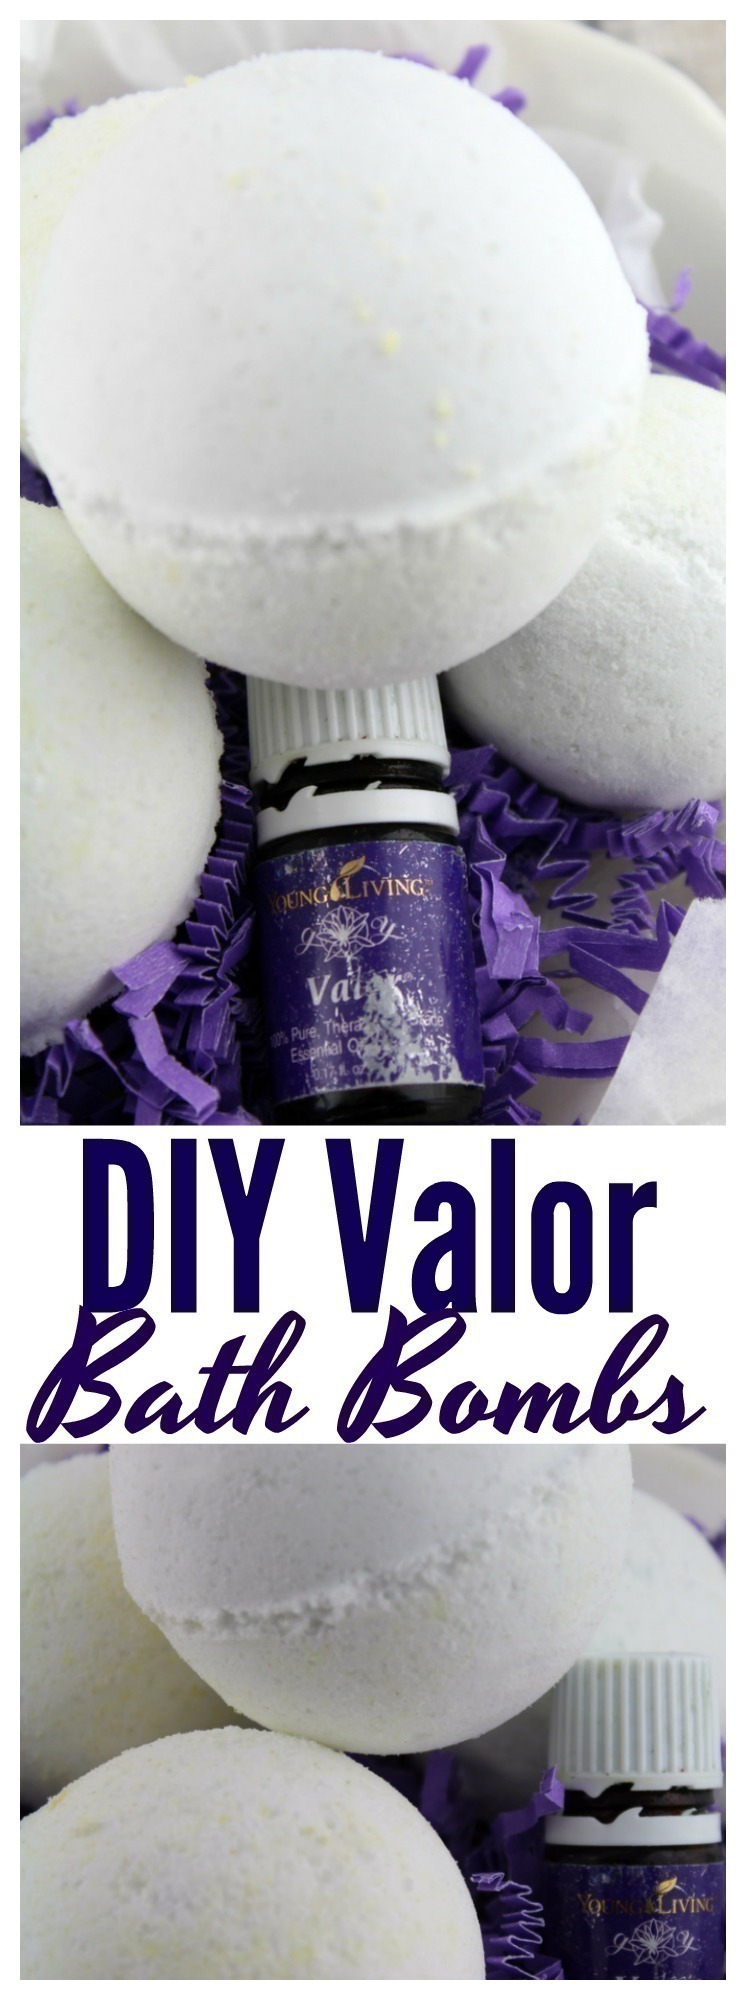 These DIY Valor Bath Bombs are incredibly easy to make - personalize with your own scent and color and give as gifts for Father's Day, Valentine's Day, birthdays and more.